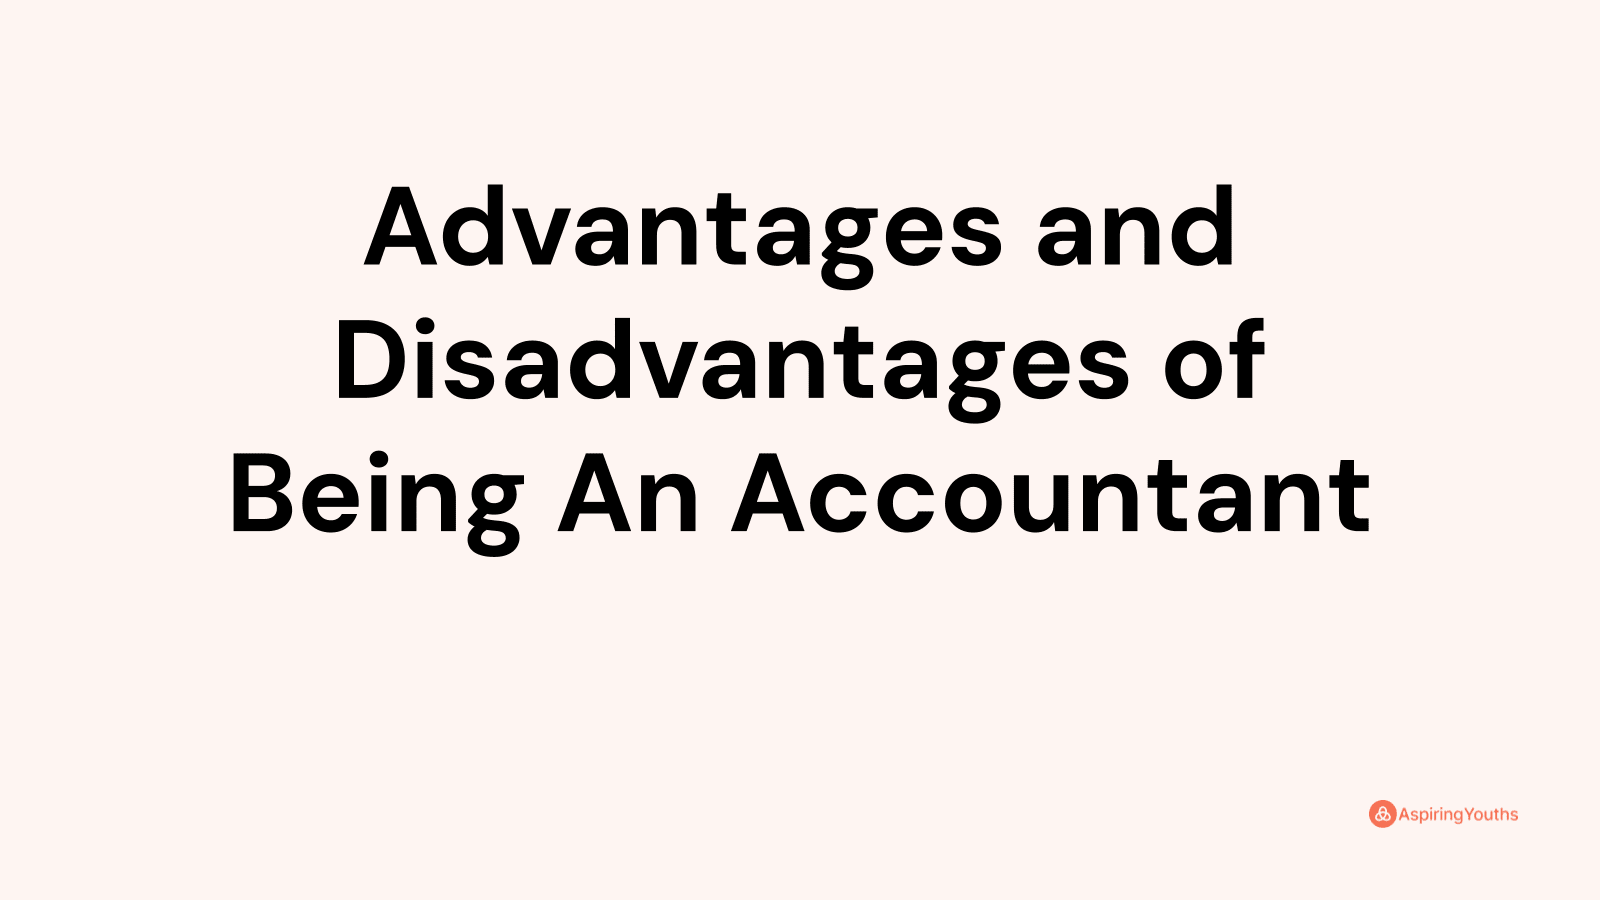 Advantages and disadvantages of Being An Accountant